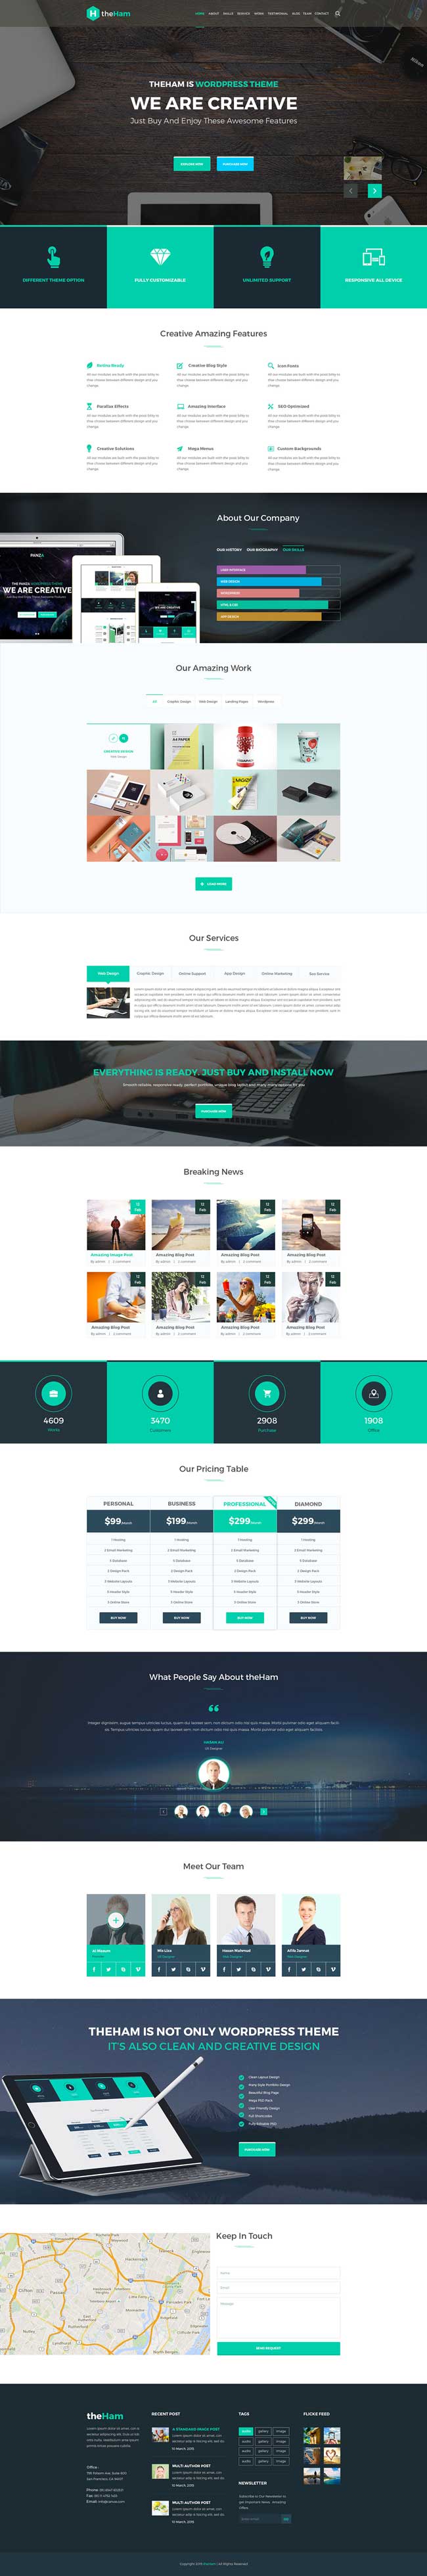 theHam-Free-Creative-Landing-Page-PSD-Template